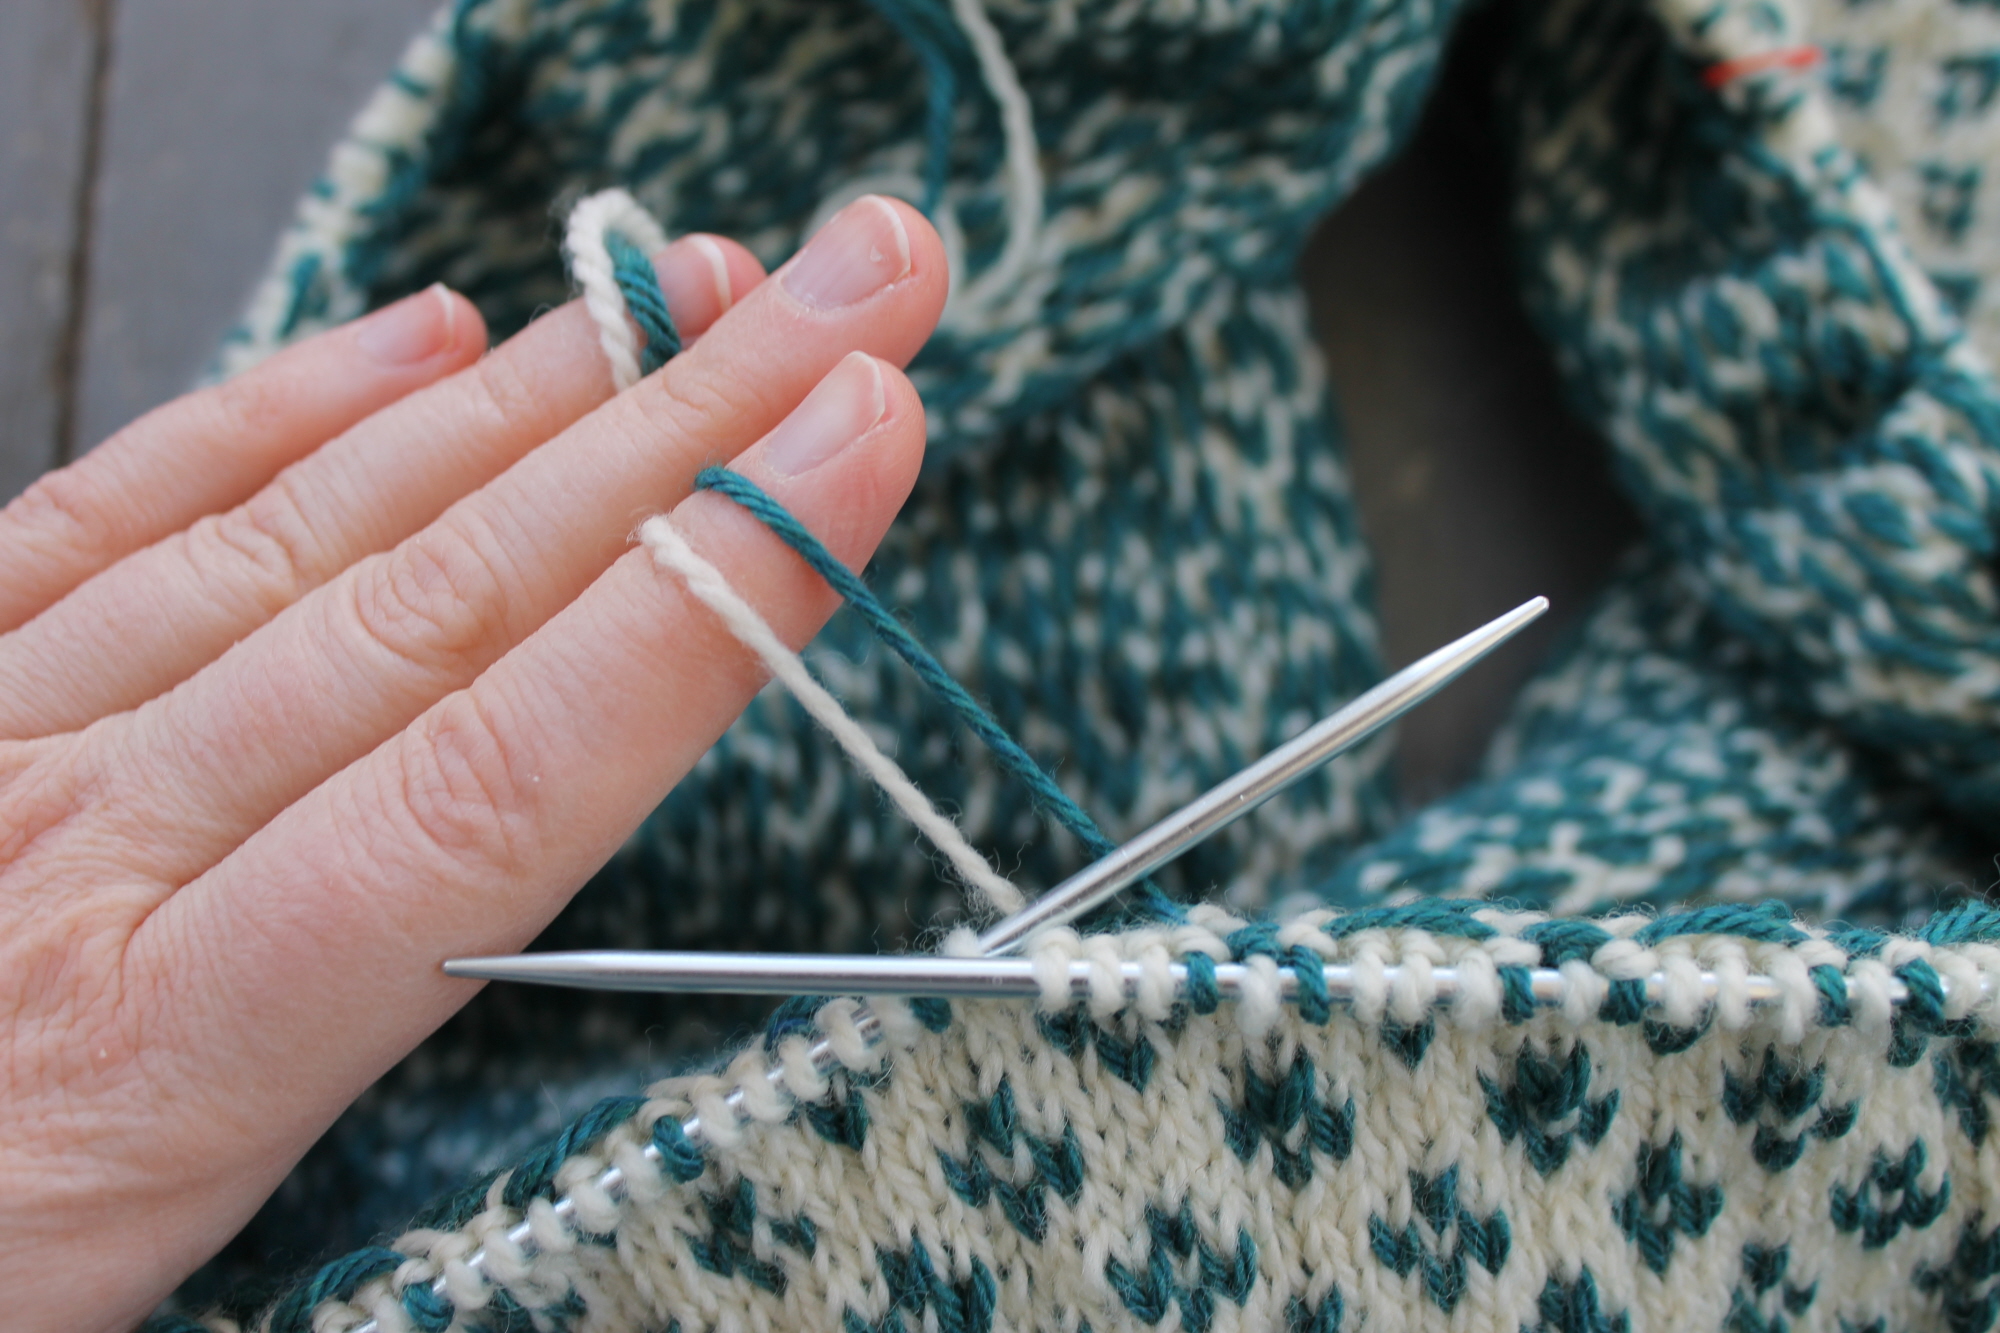 Holding both yarns in the left hand for stranded knitting